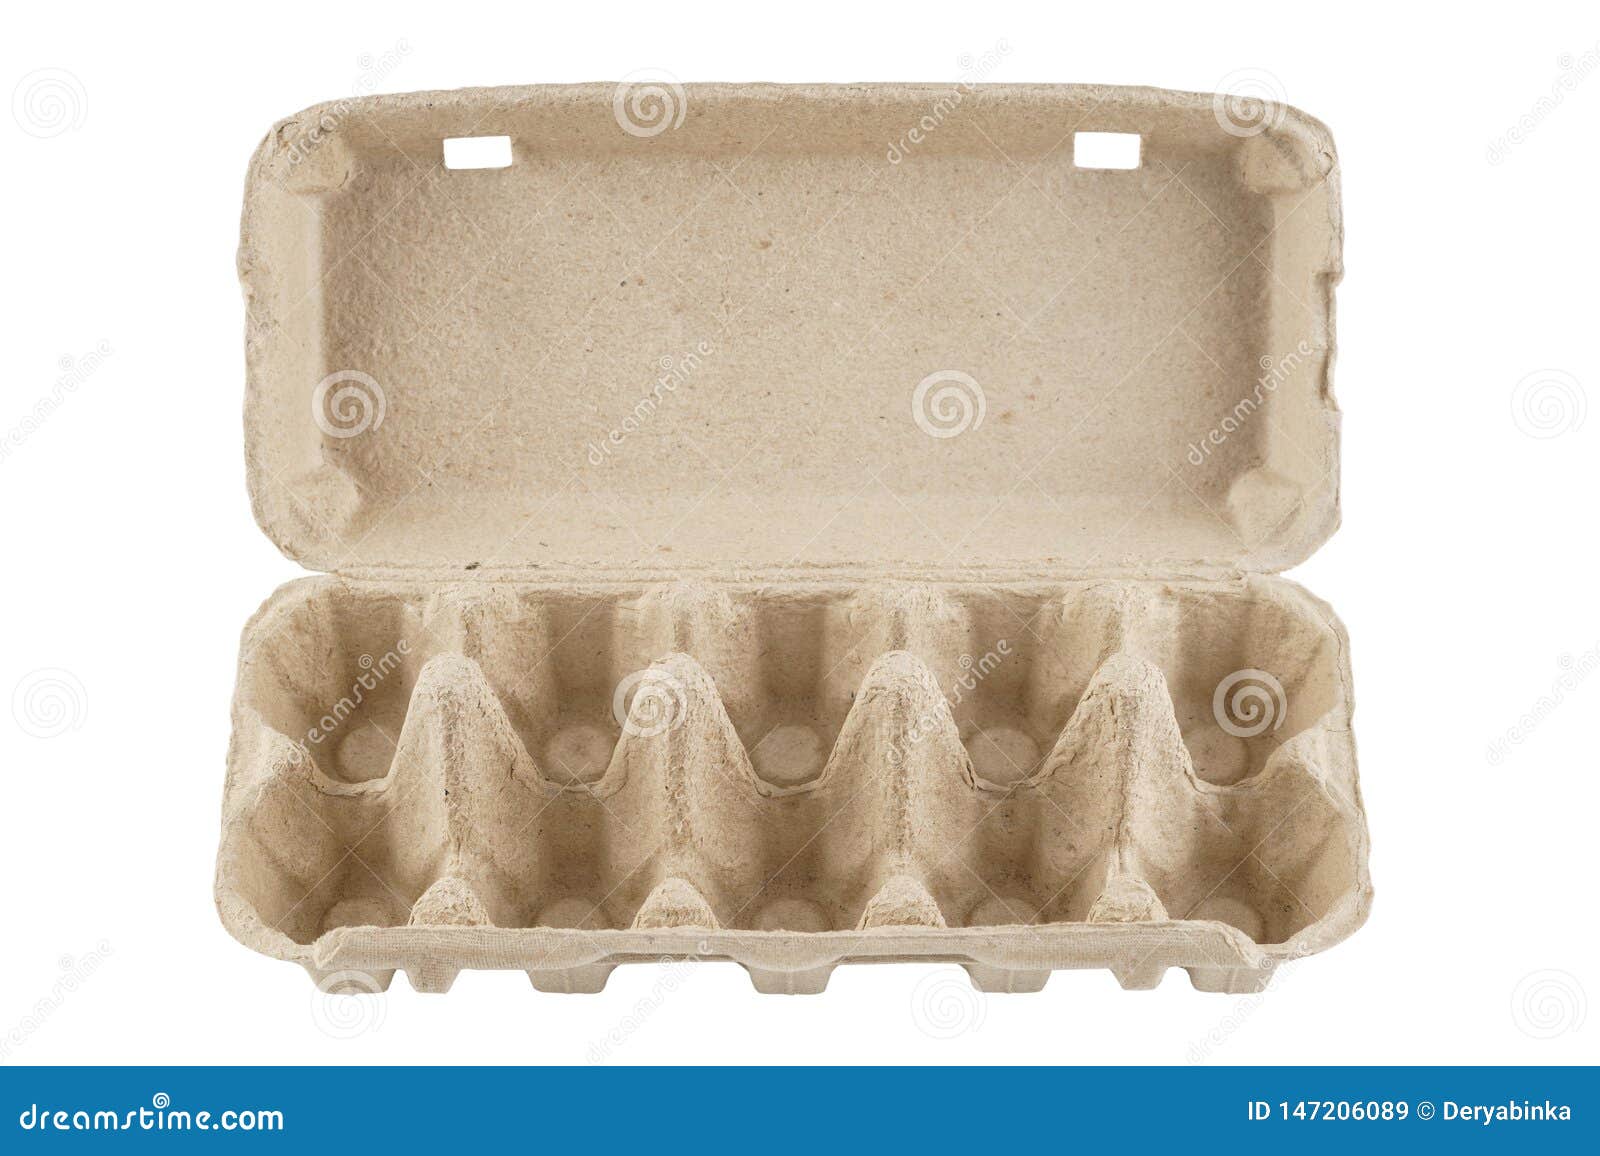 empty egg carton, box, tray or container  on white